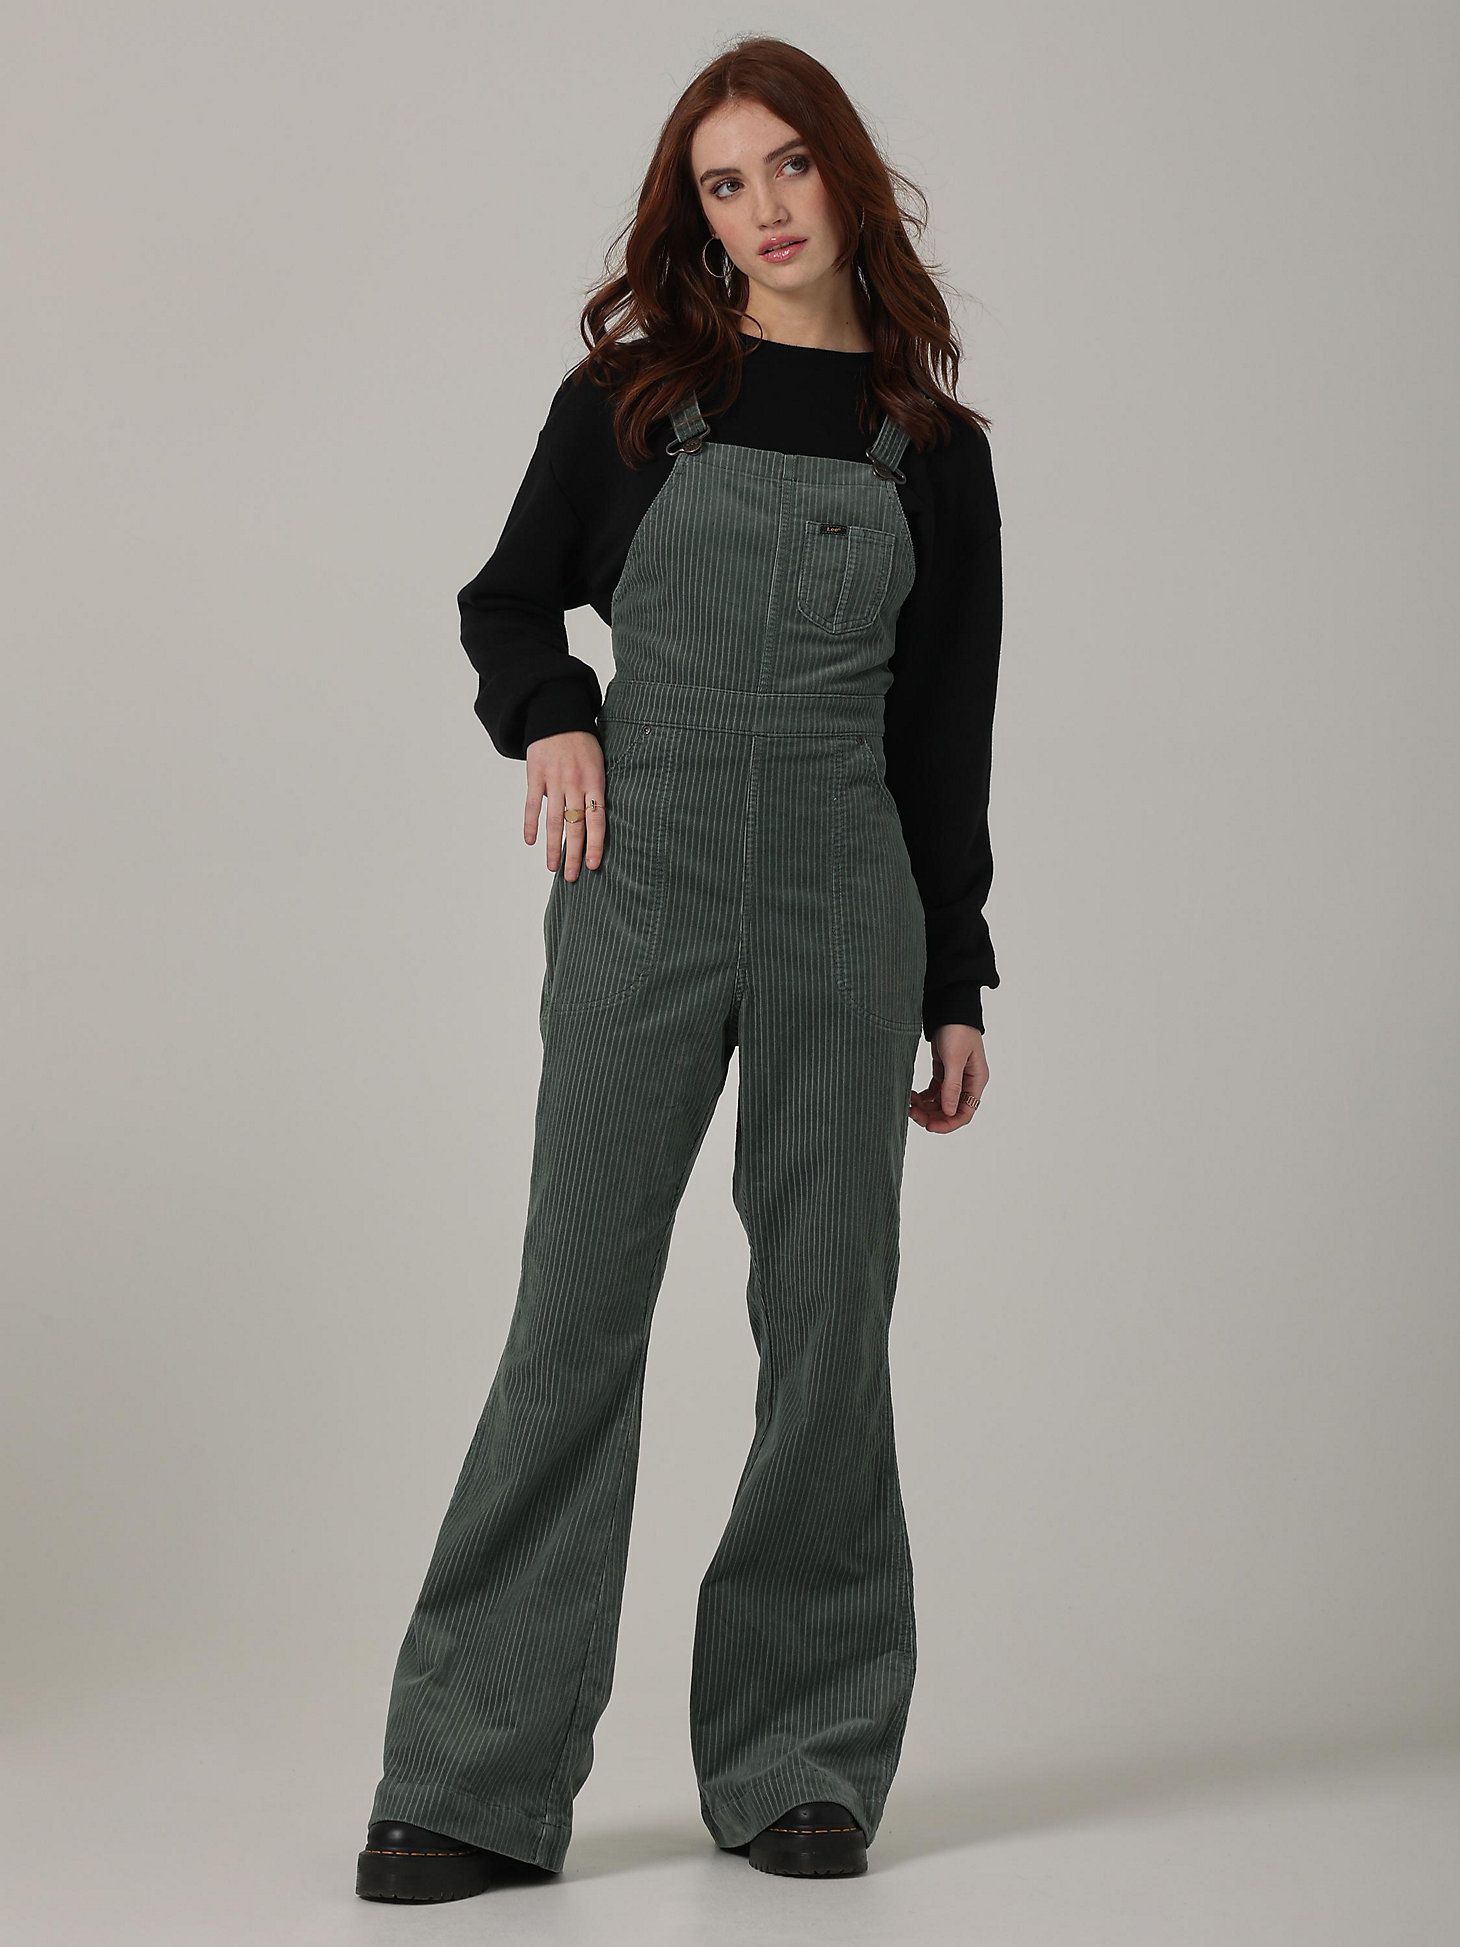 Women's Lee European Collection Factory Flare Corduroy Overall | Women&apos;s Corduroy | Lee® | Lee Jeans